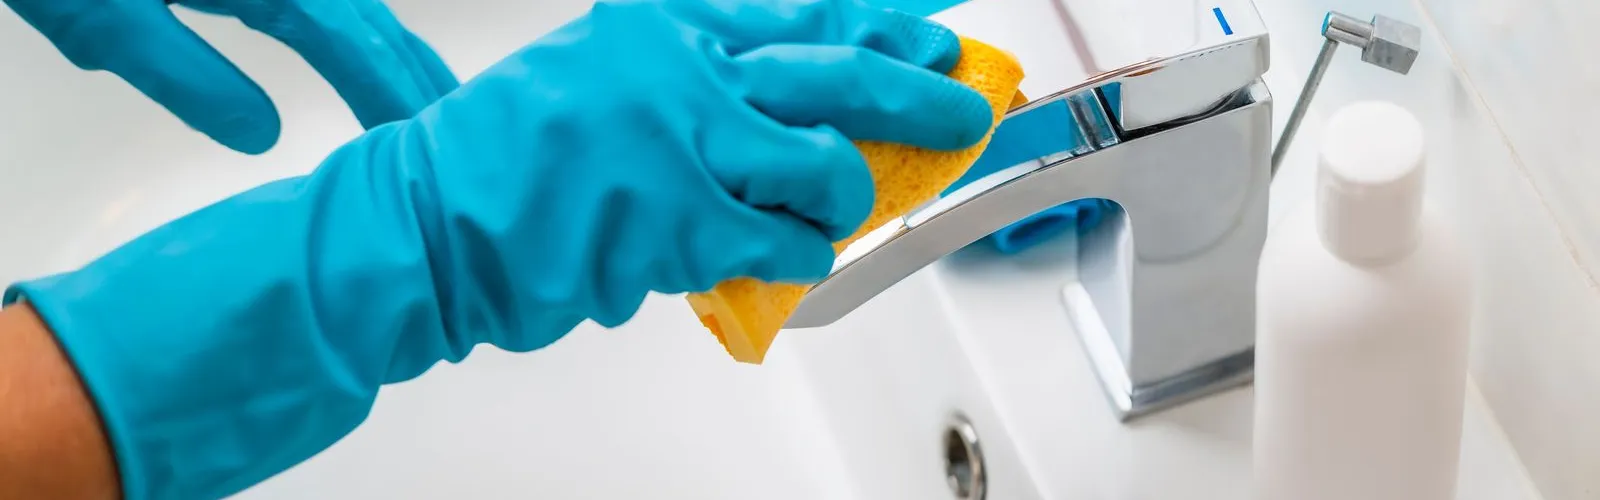 a person in a blue glove cleaning a faucet